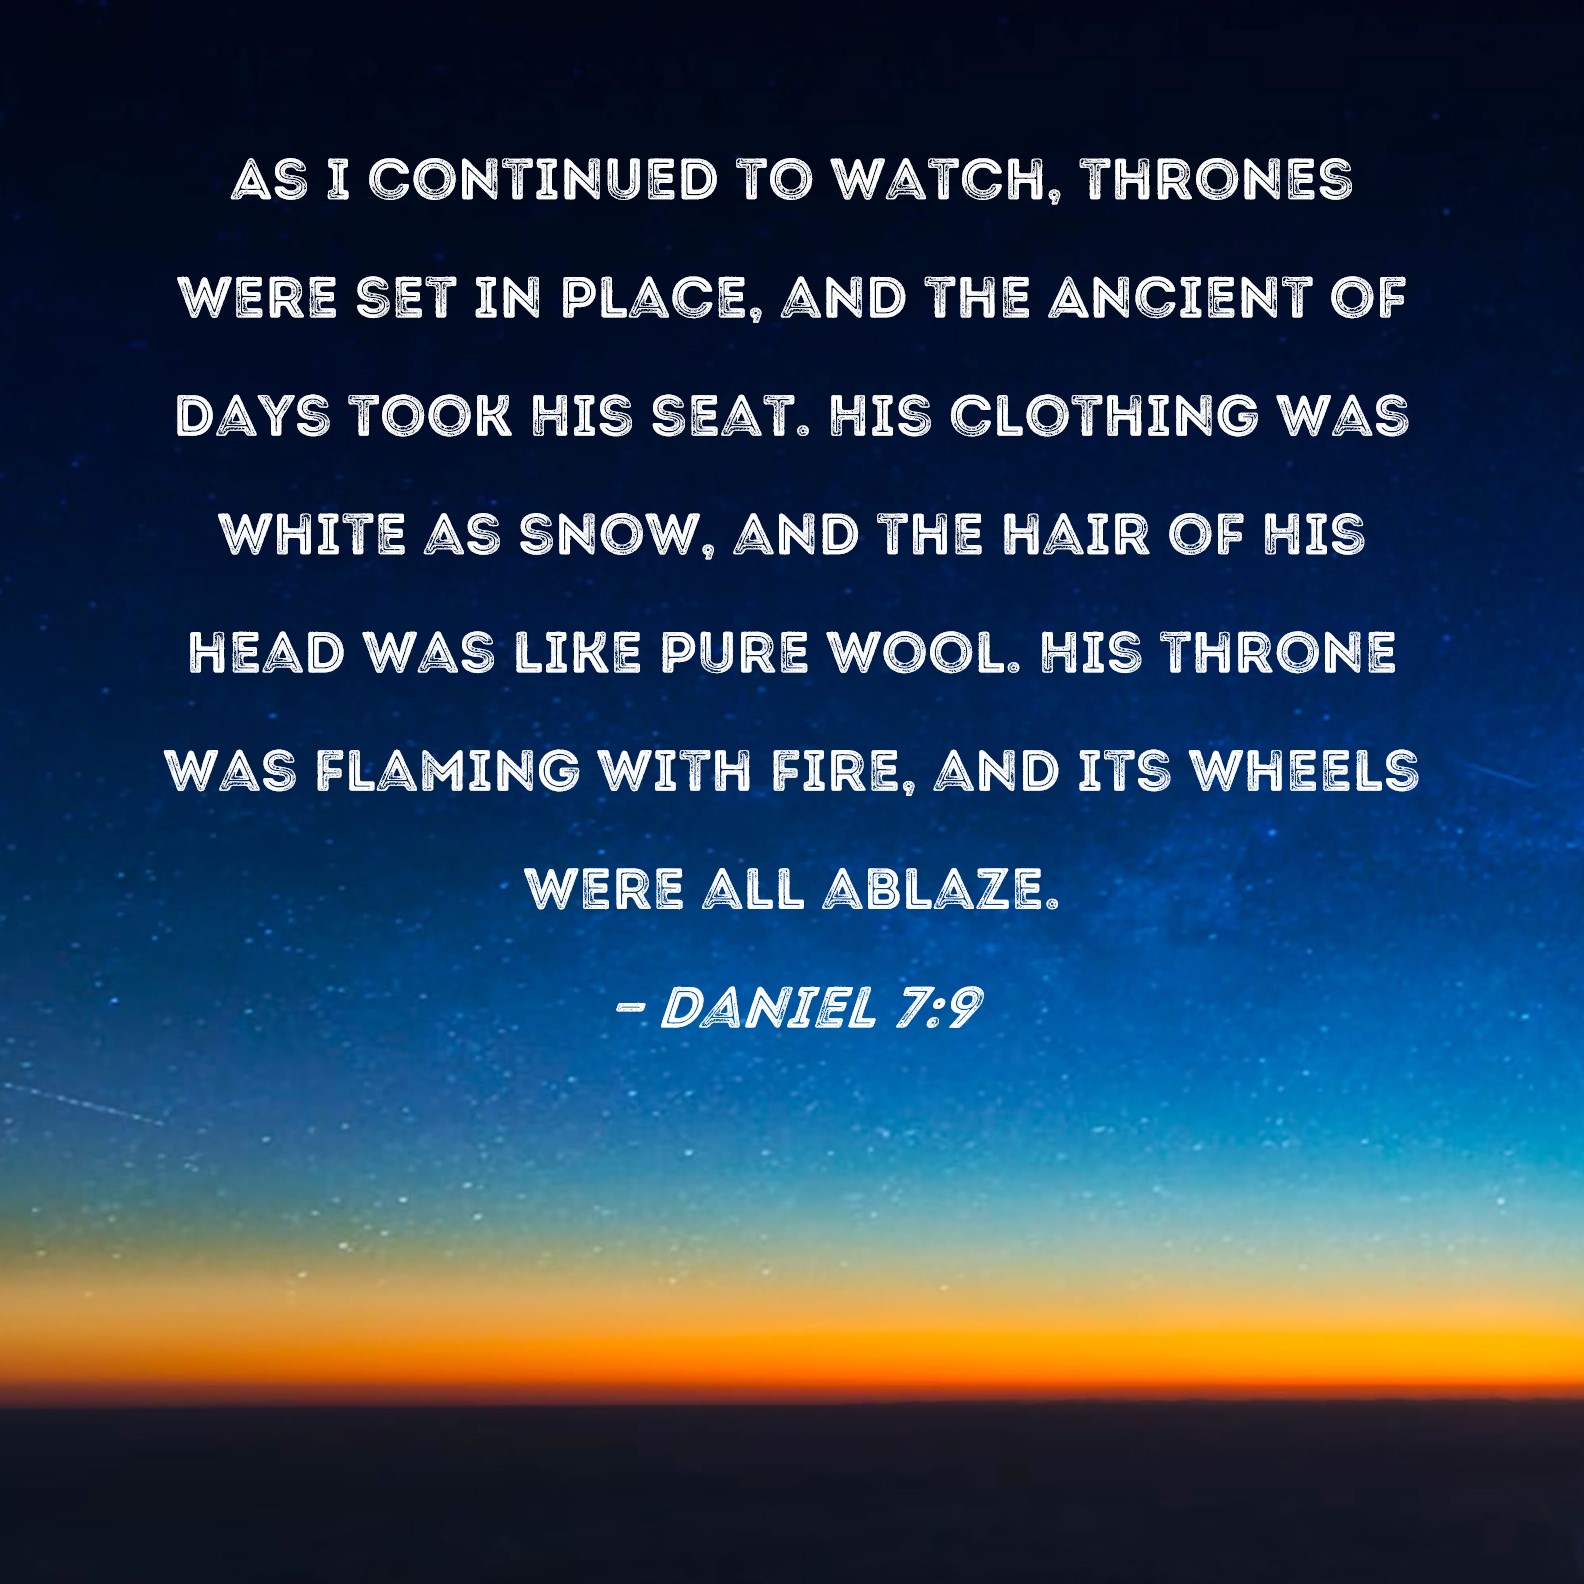 Daniel 7:9 As I continued to watch, thrones were set in place, and the  Ancient of Days took His seat. His clothing was white as snow, and the hair  of His head